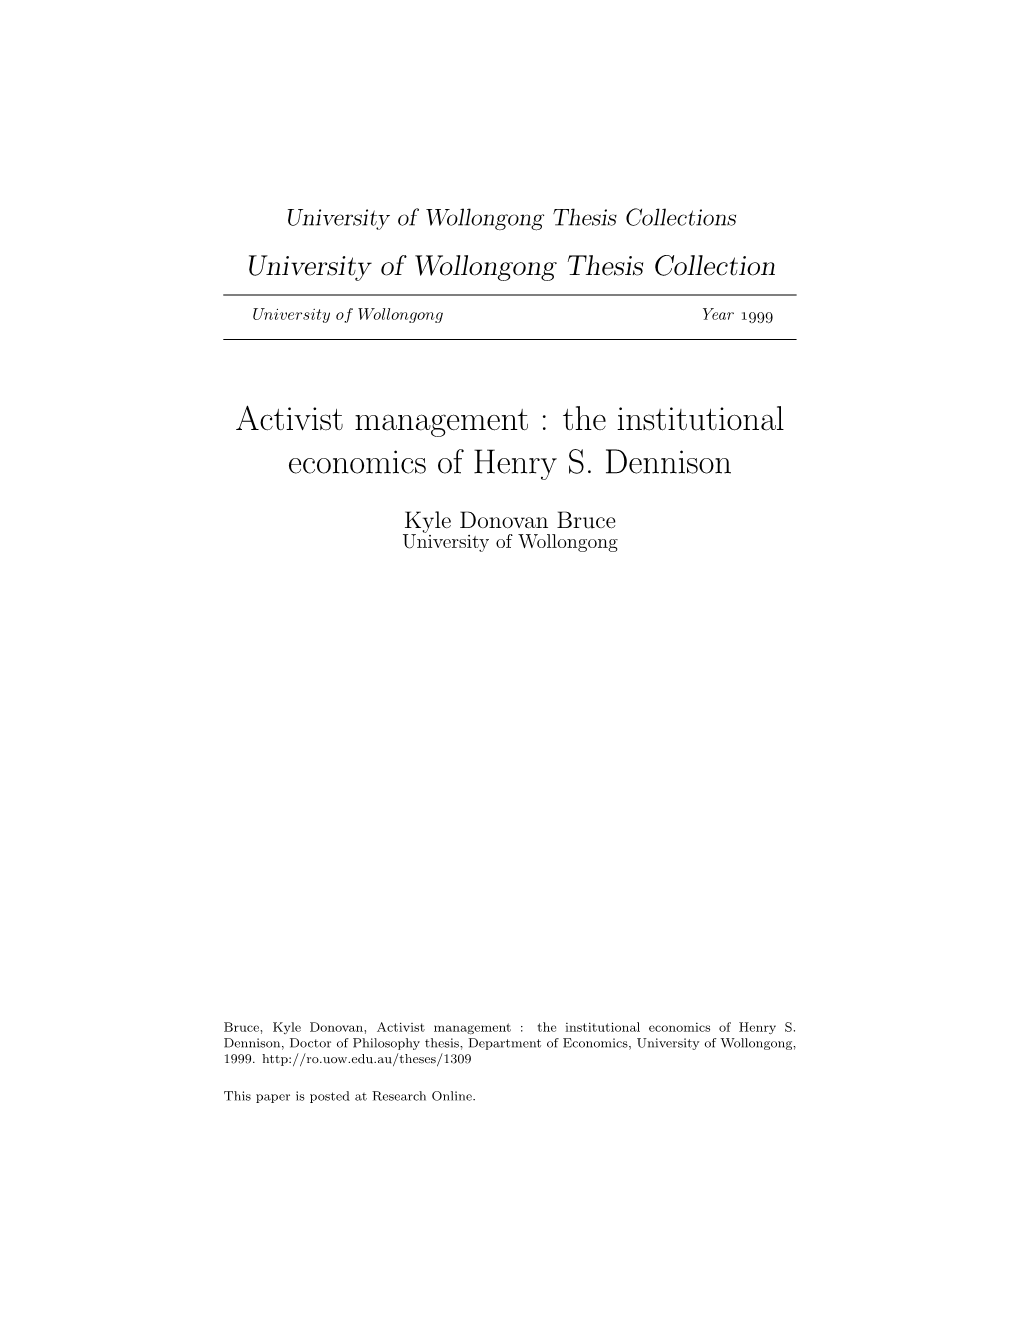 The Institutional Economics of Henry S. Dennison